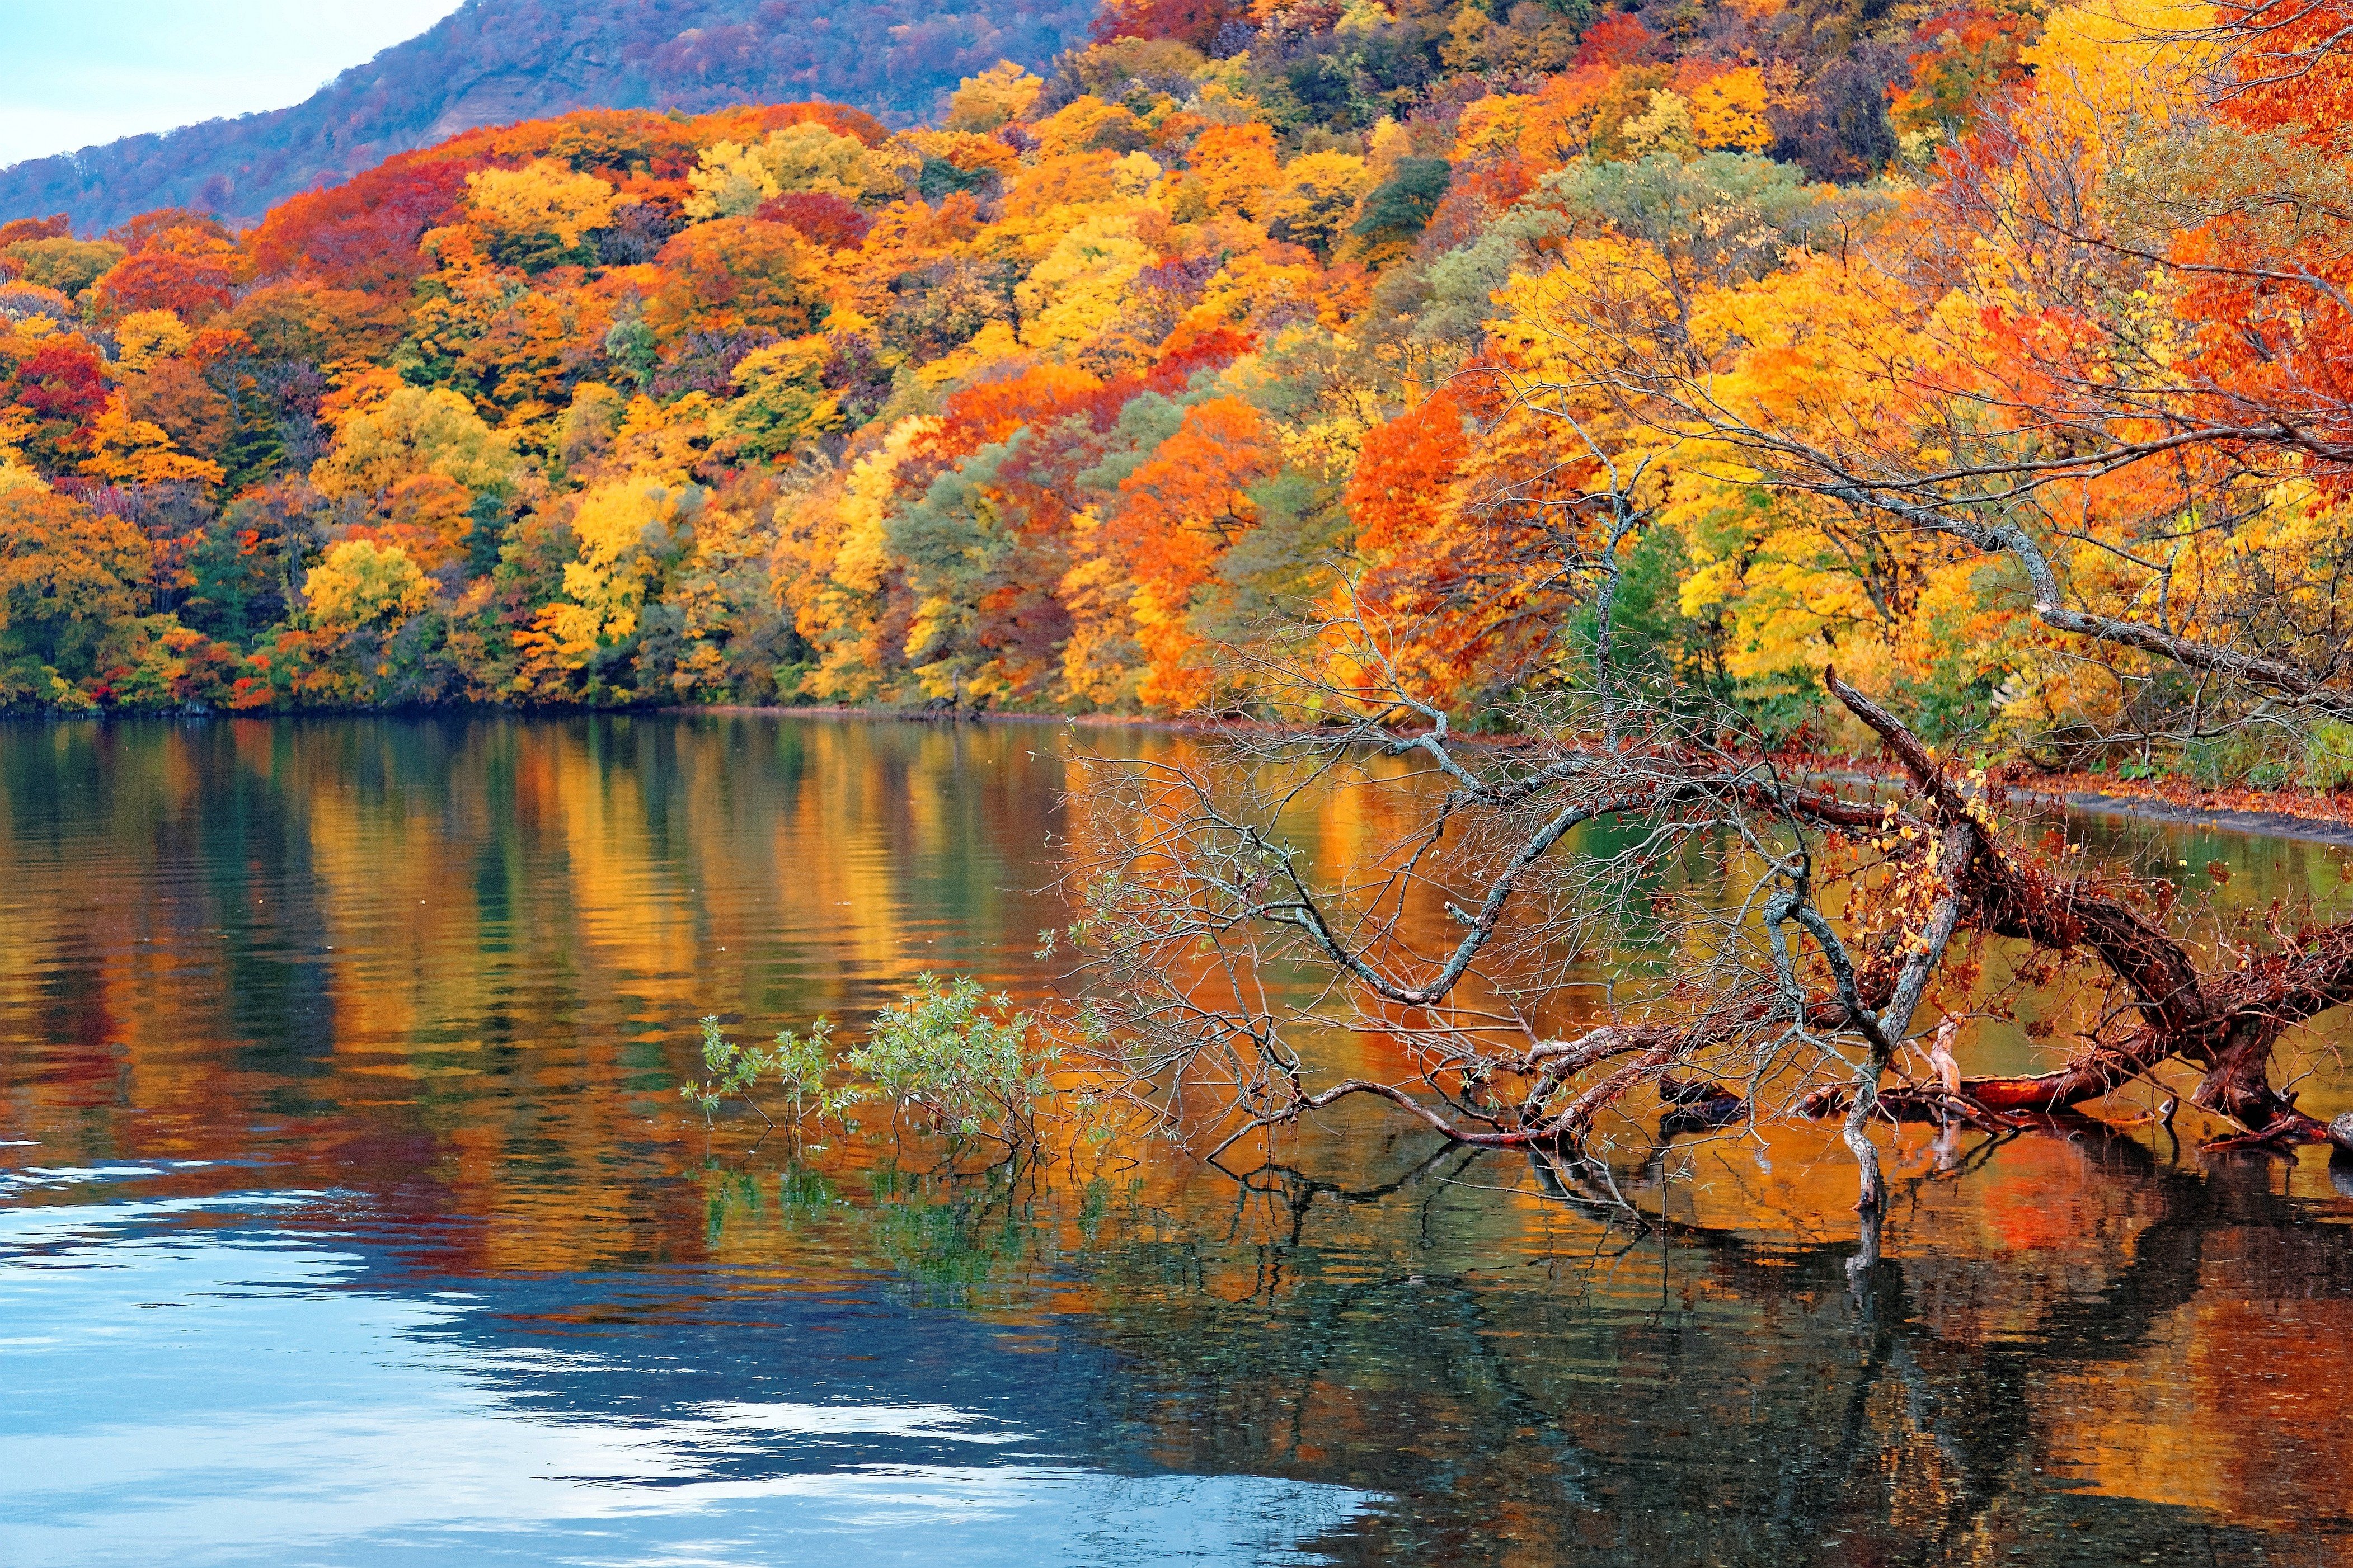 Lake Towada in the mountains of Aomori is one of the first places to see autumn leaves turn yellow, orange, and red
               Away from the crowds, it is a tranquil spot to take in one of nature’s spectacles